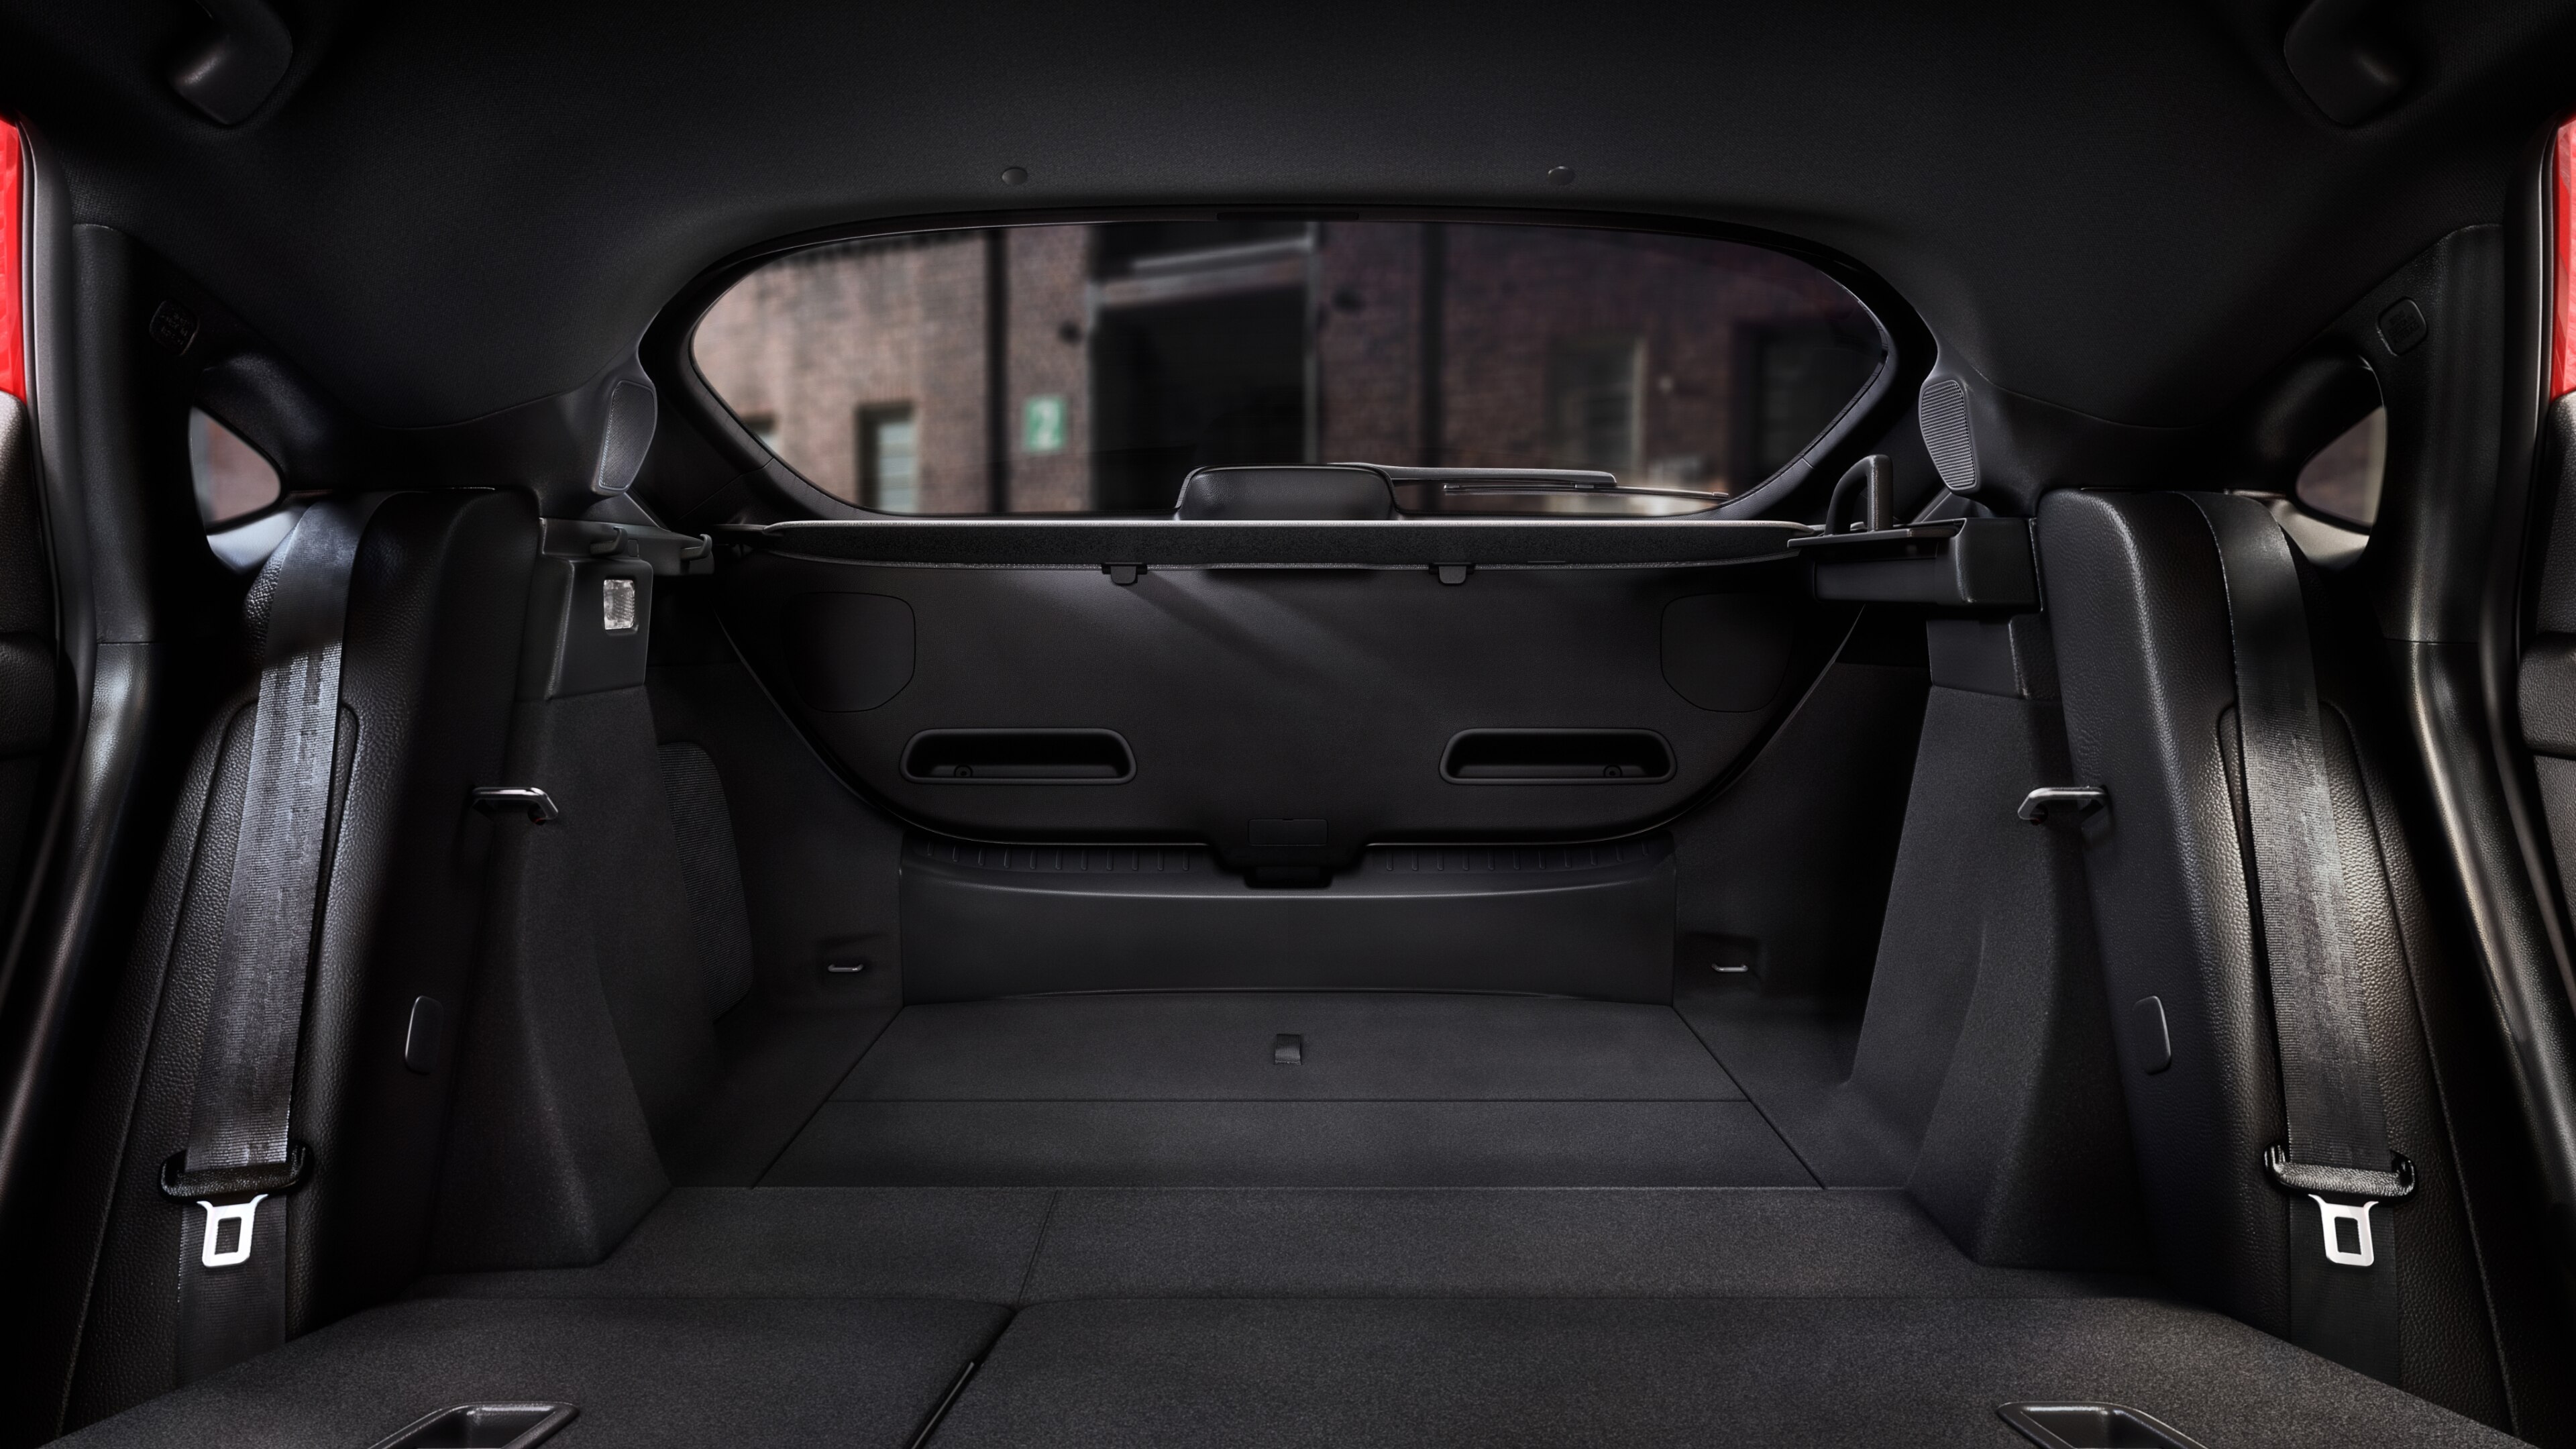 View out the open rear door of a Honda Civic Hatchback with back seats down